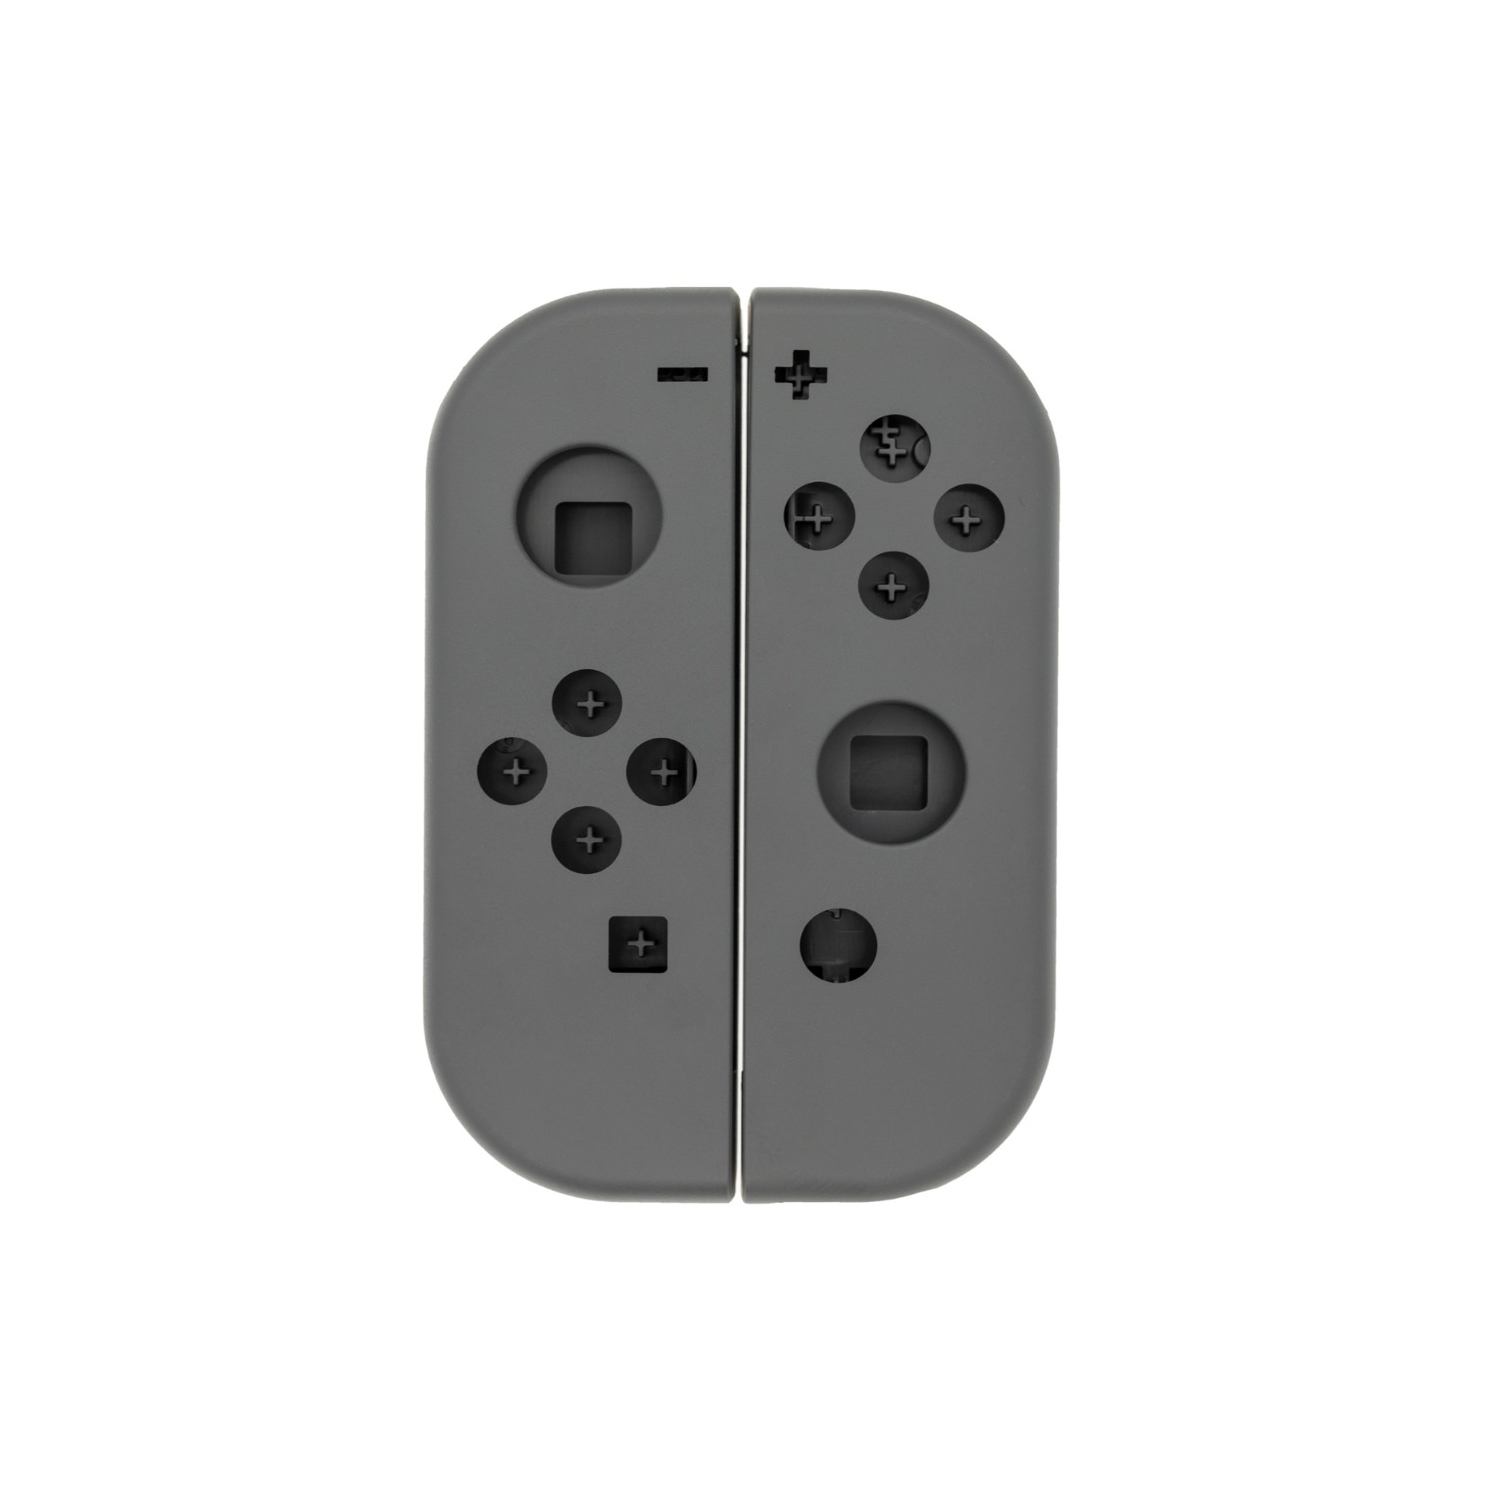 Replacement Housing Shell Case For Nintendo Switch Joy Con Controller - Black